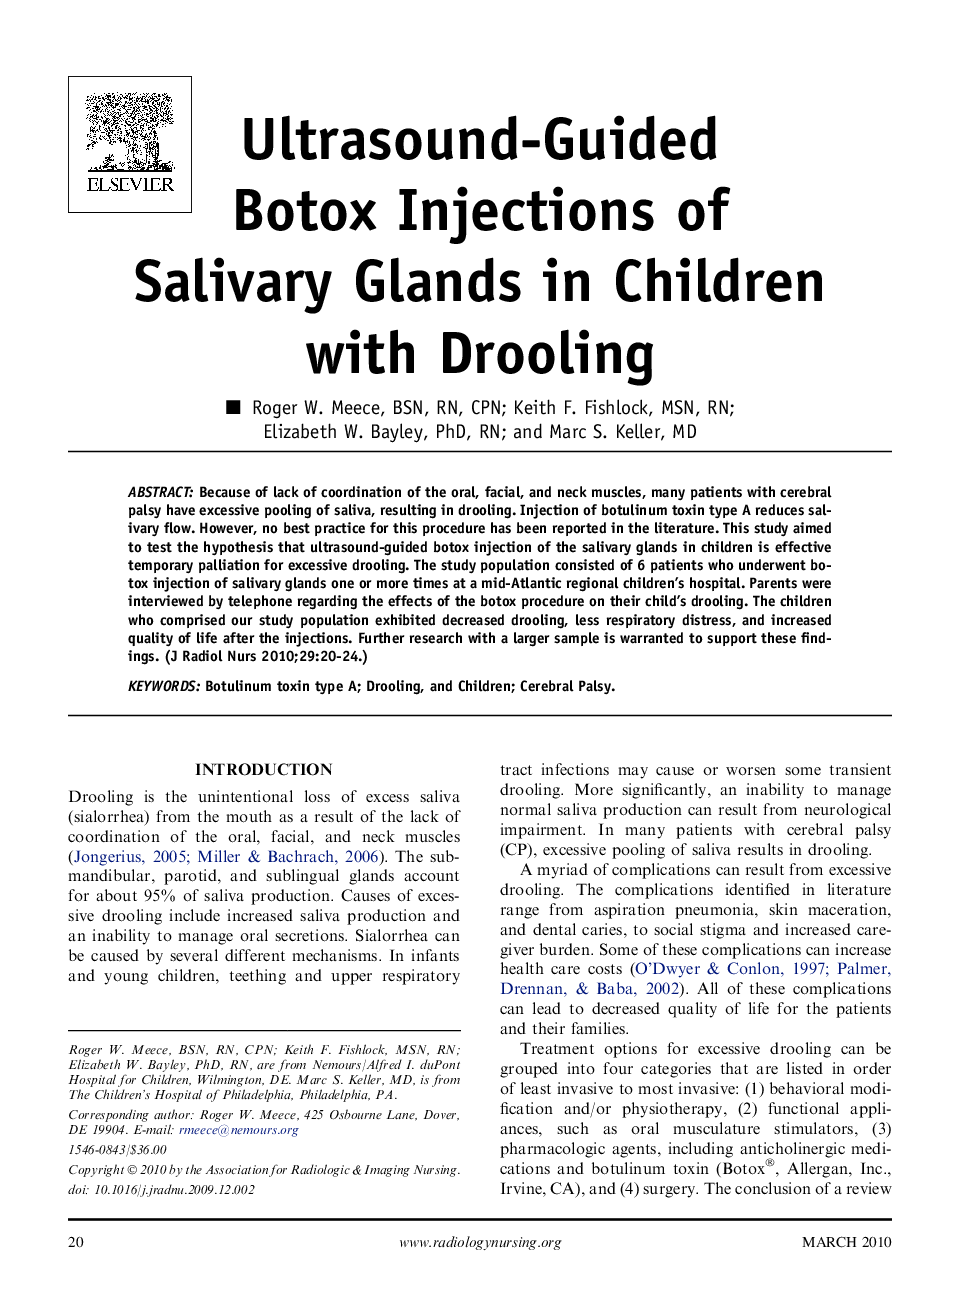 Ultrasound-Guided Botox Injections of Salivary Glands in Children with Drooling